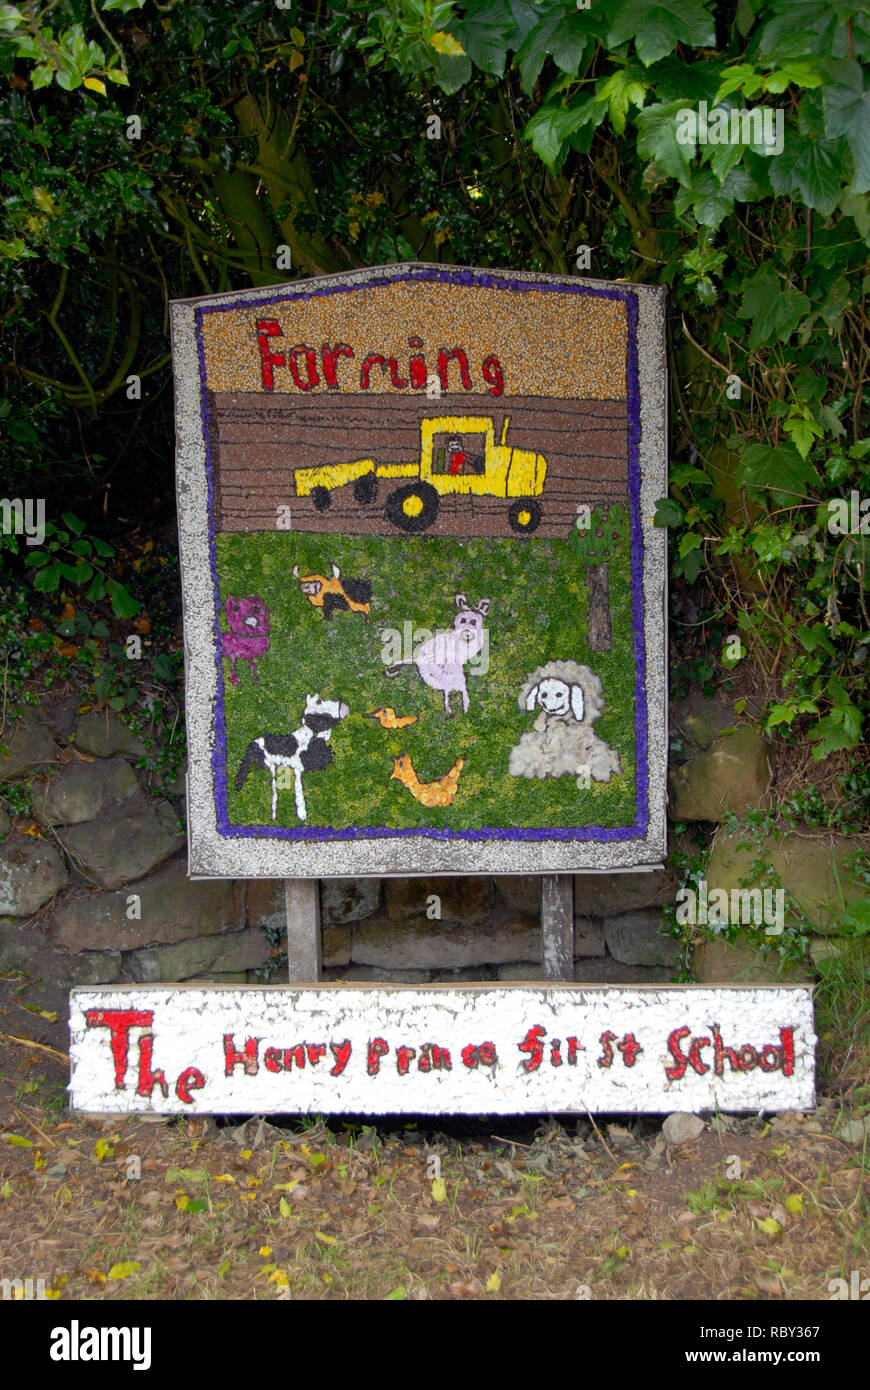 Well dressing made by school children, Youlgreave, Derbyshire, England. Stock Photo